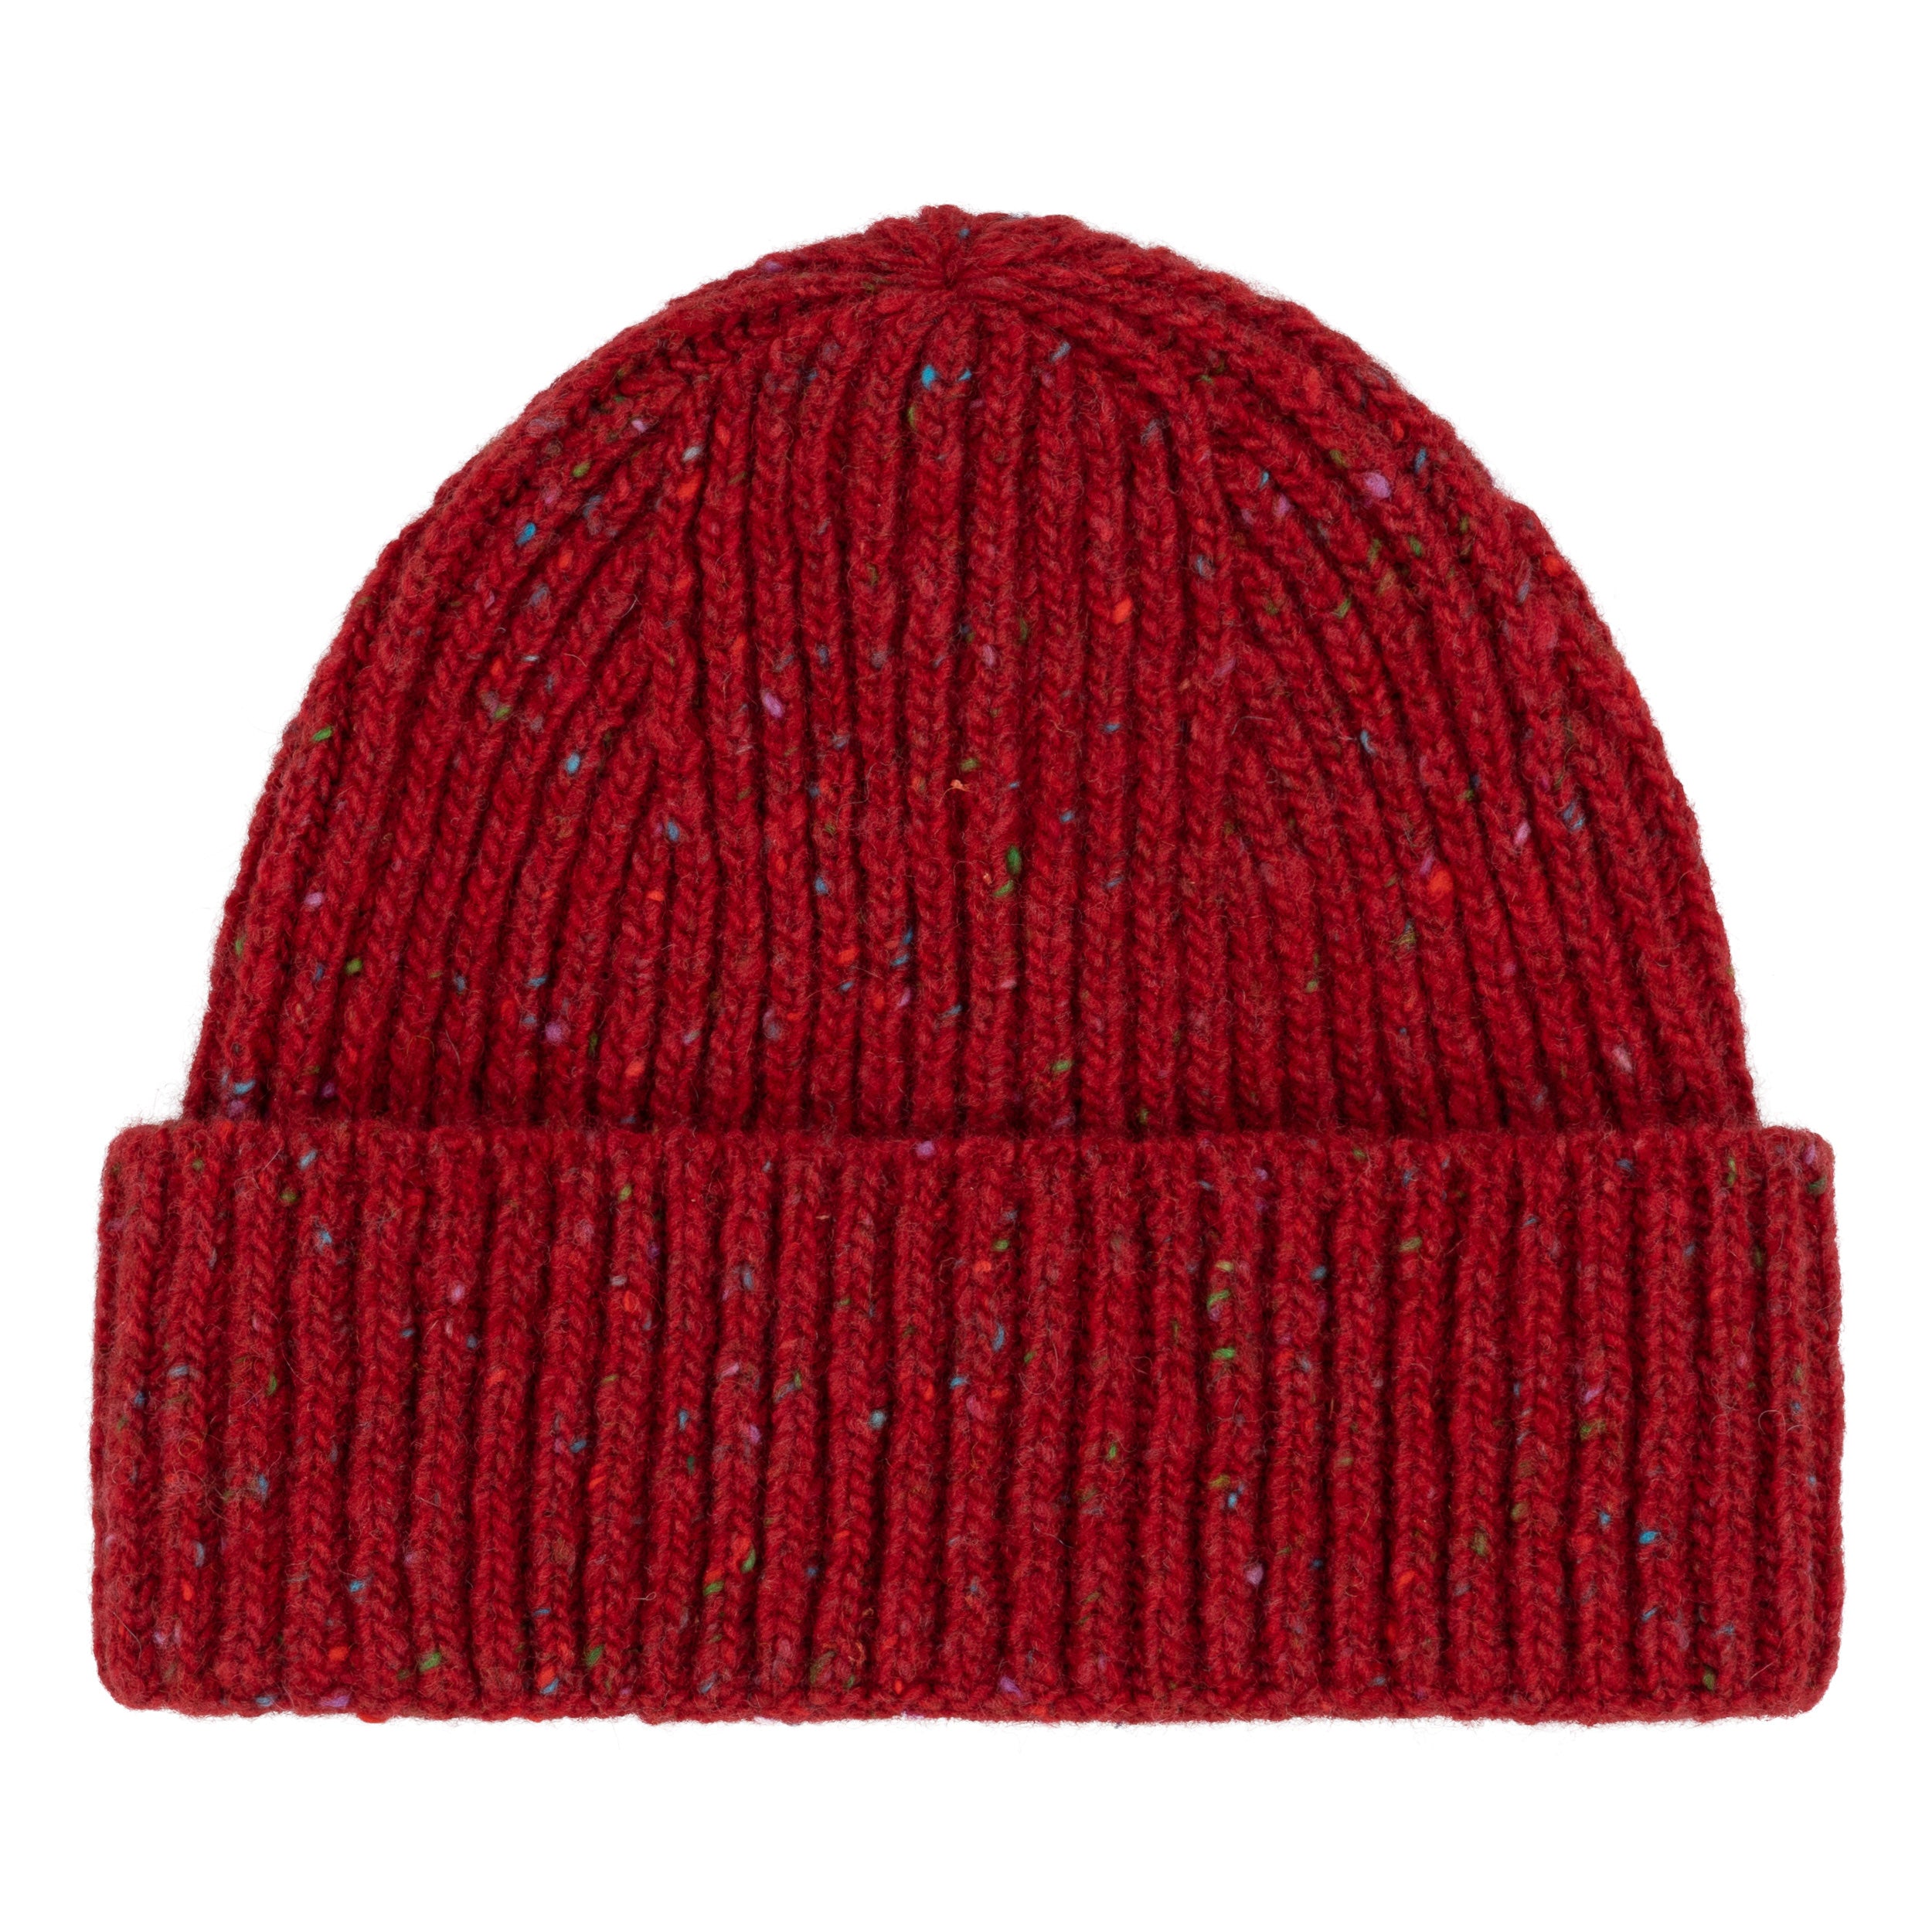 Carrier Company Carmine Donegal Wool Hat in Carmine